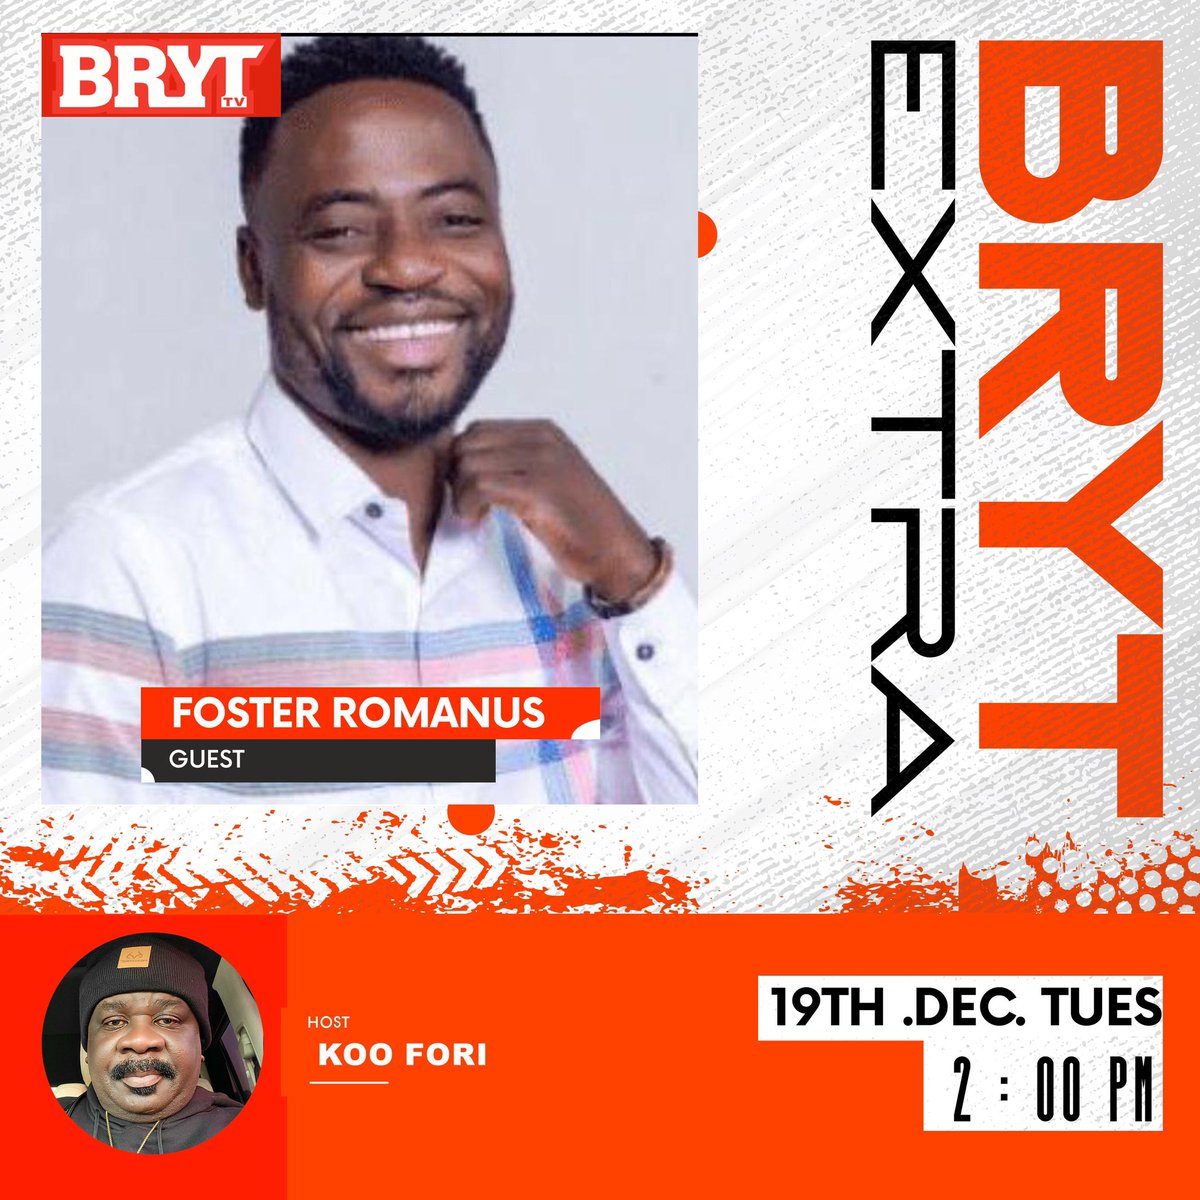 Don’t miss out on today’s #BrytExtra🤩📍show as @fosterromanus joins as our guest🤩 Tune in live w/ host, @koo_fori at 2:00PM🕑 Make a date.📌 #bryttv